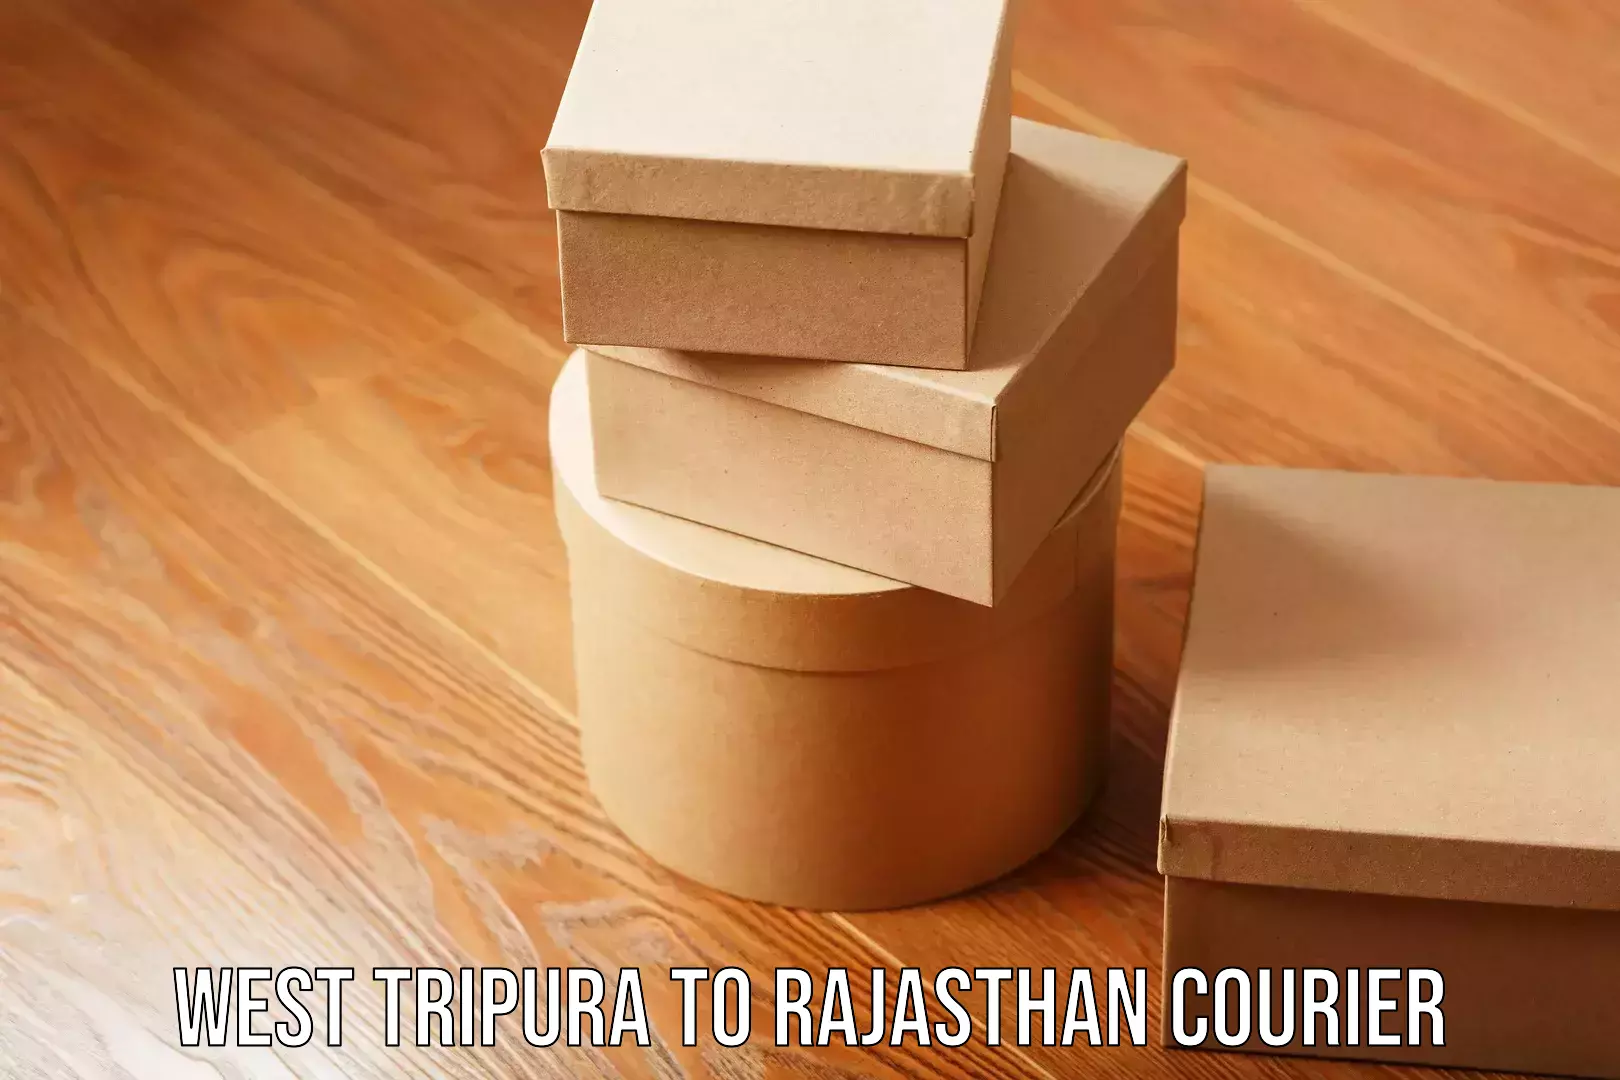 Tech-enabled shipping in West Tripura to Rajasthan